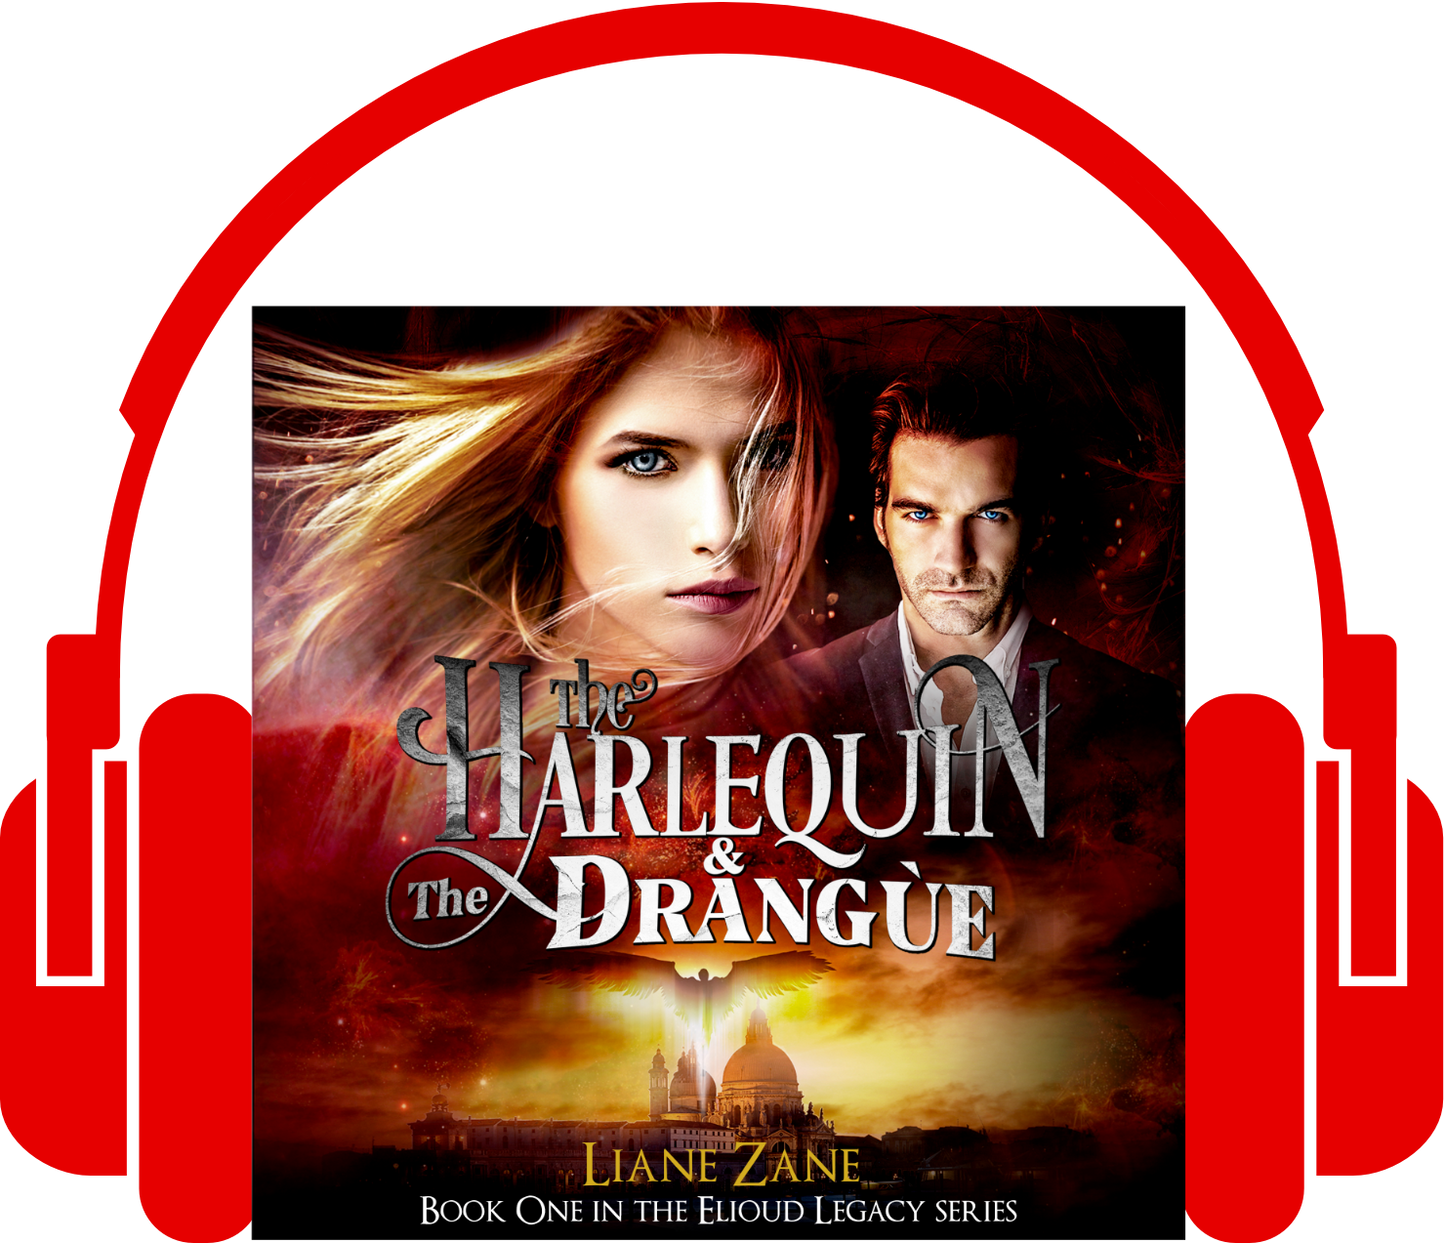 The Harlequin & The Drangùe (The Elioud Legacy Book 1)